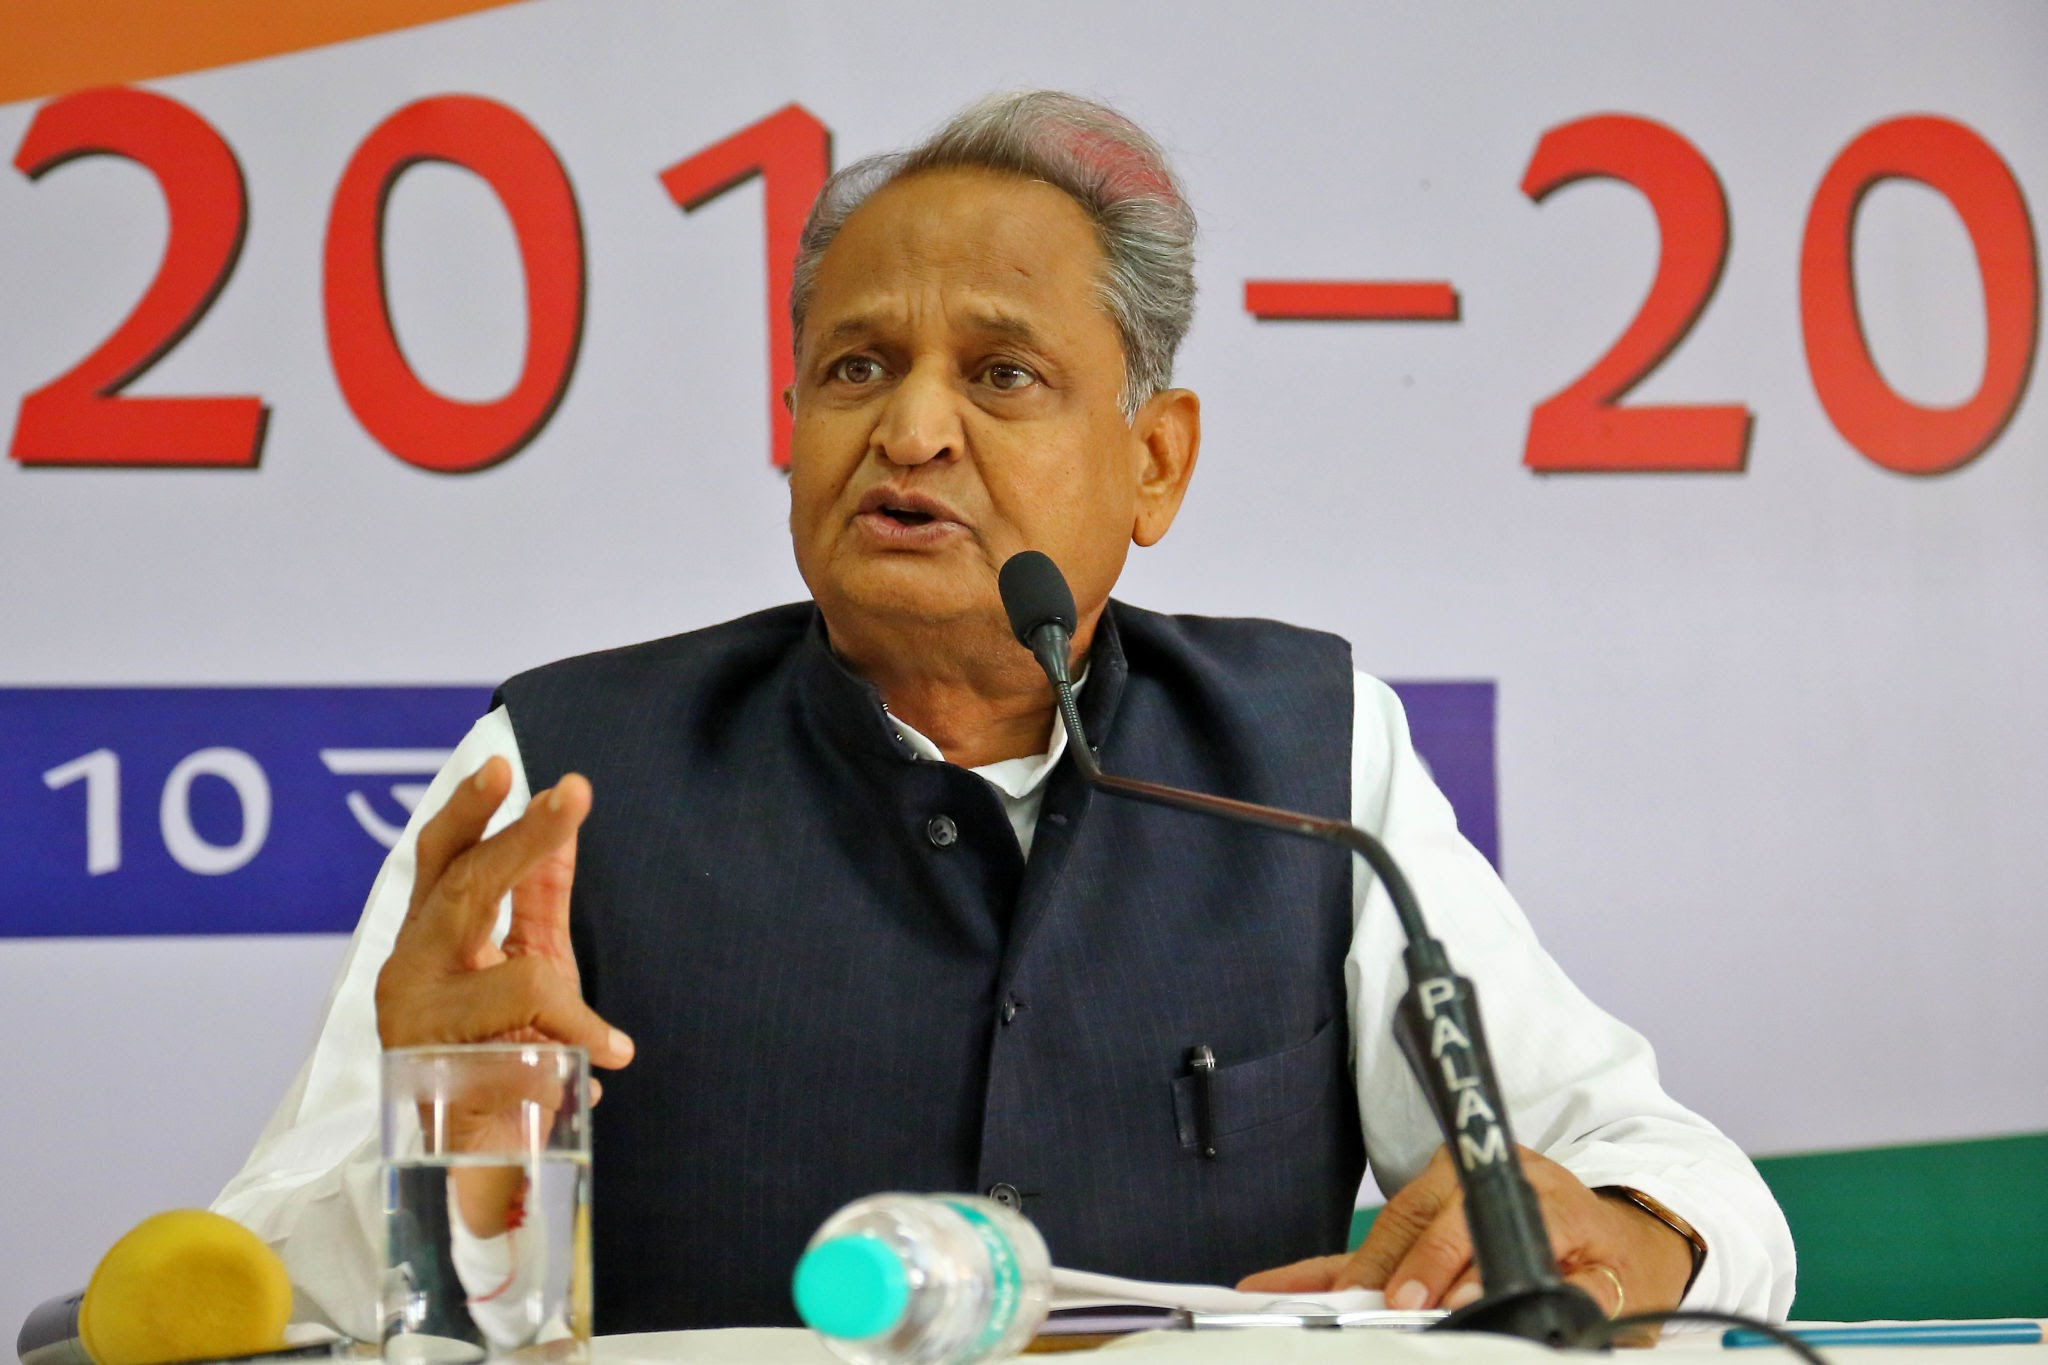 Rajasthan CM Gehlot calls meeting to address rising suicide cases among students in Kota